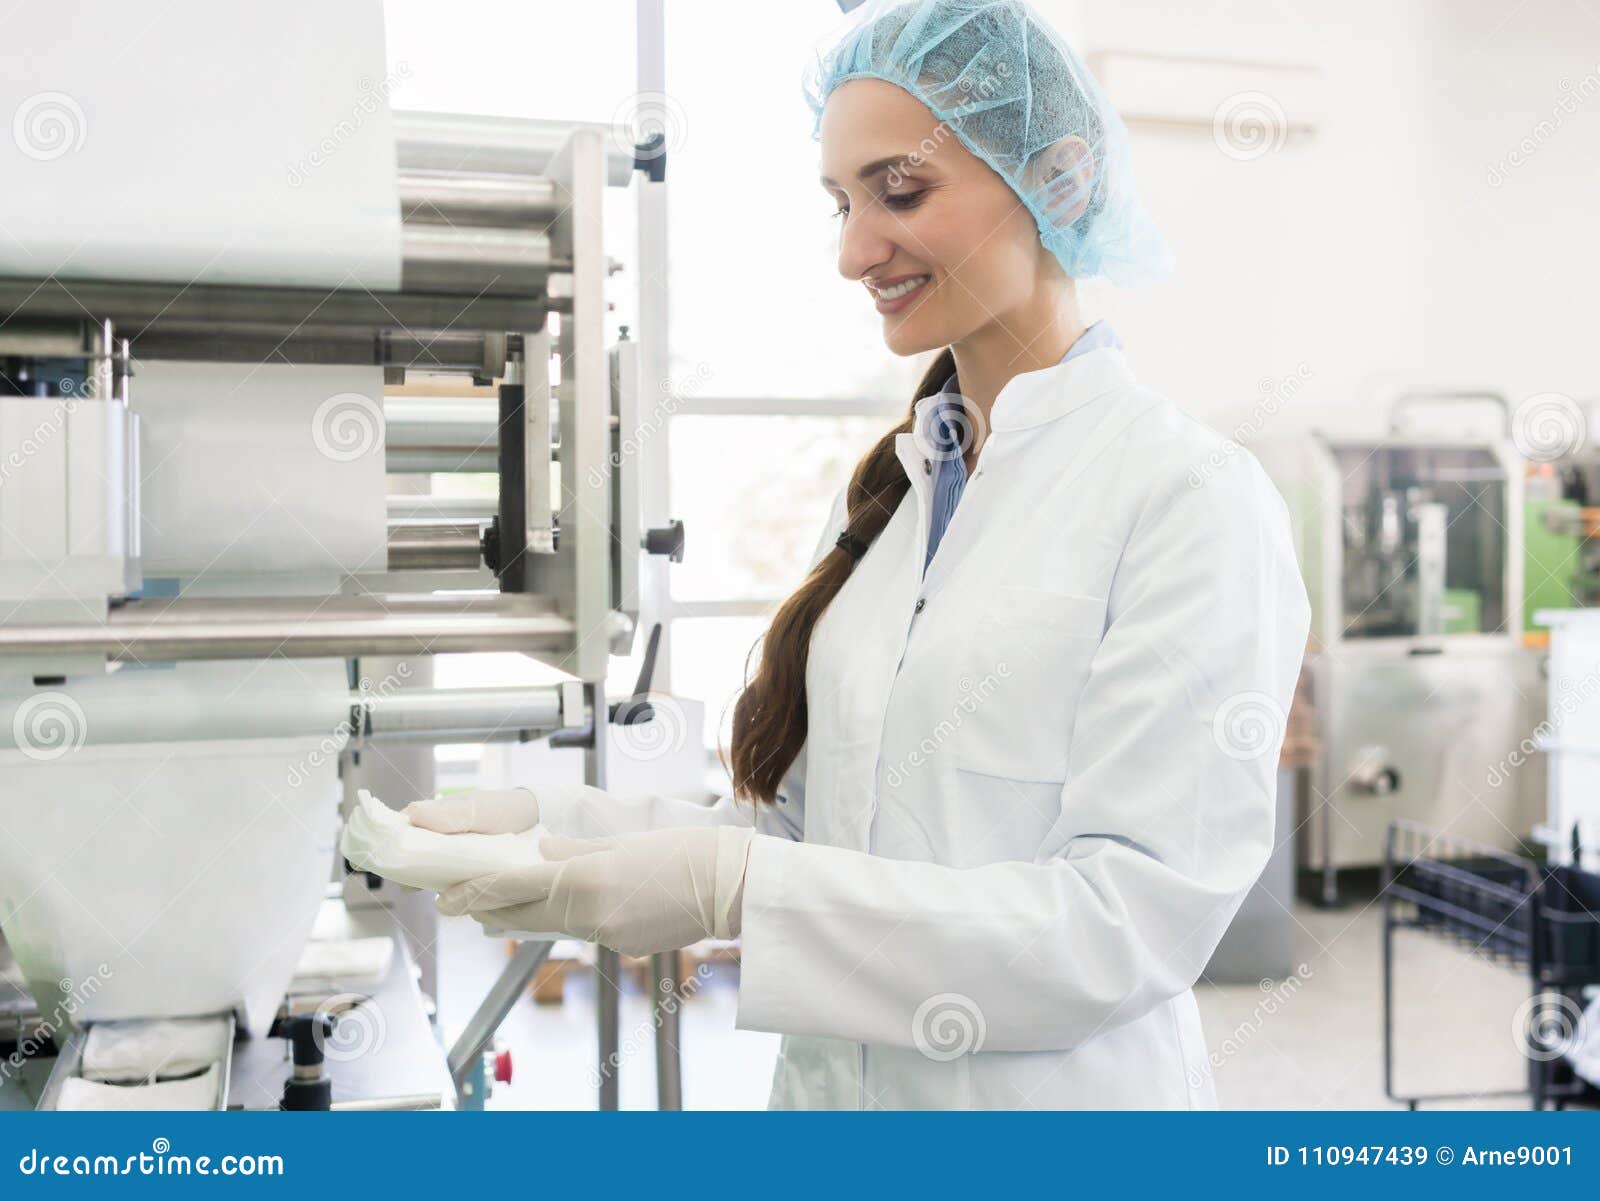 happy employee wearing lab coat while handling sterile wipes